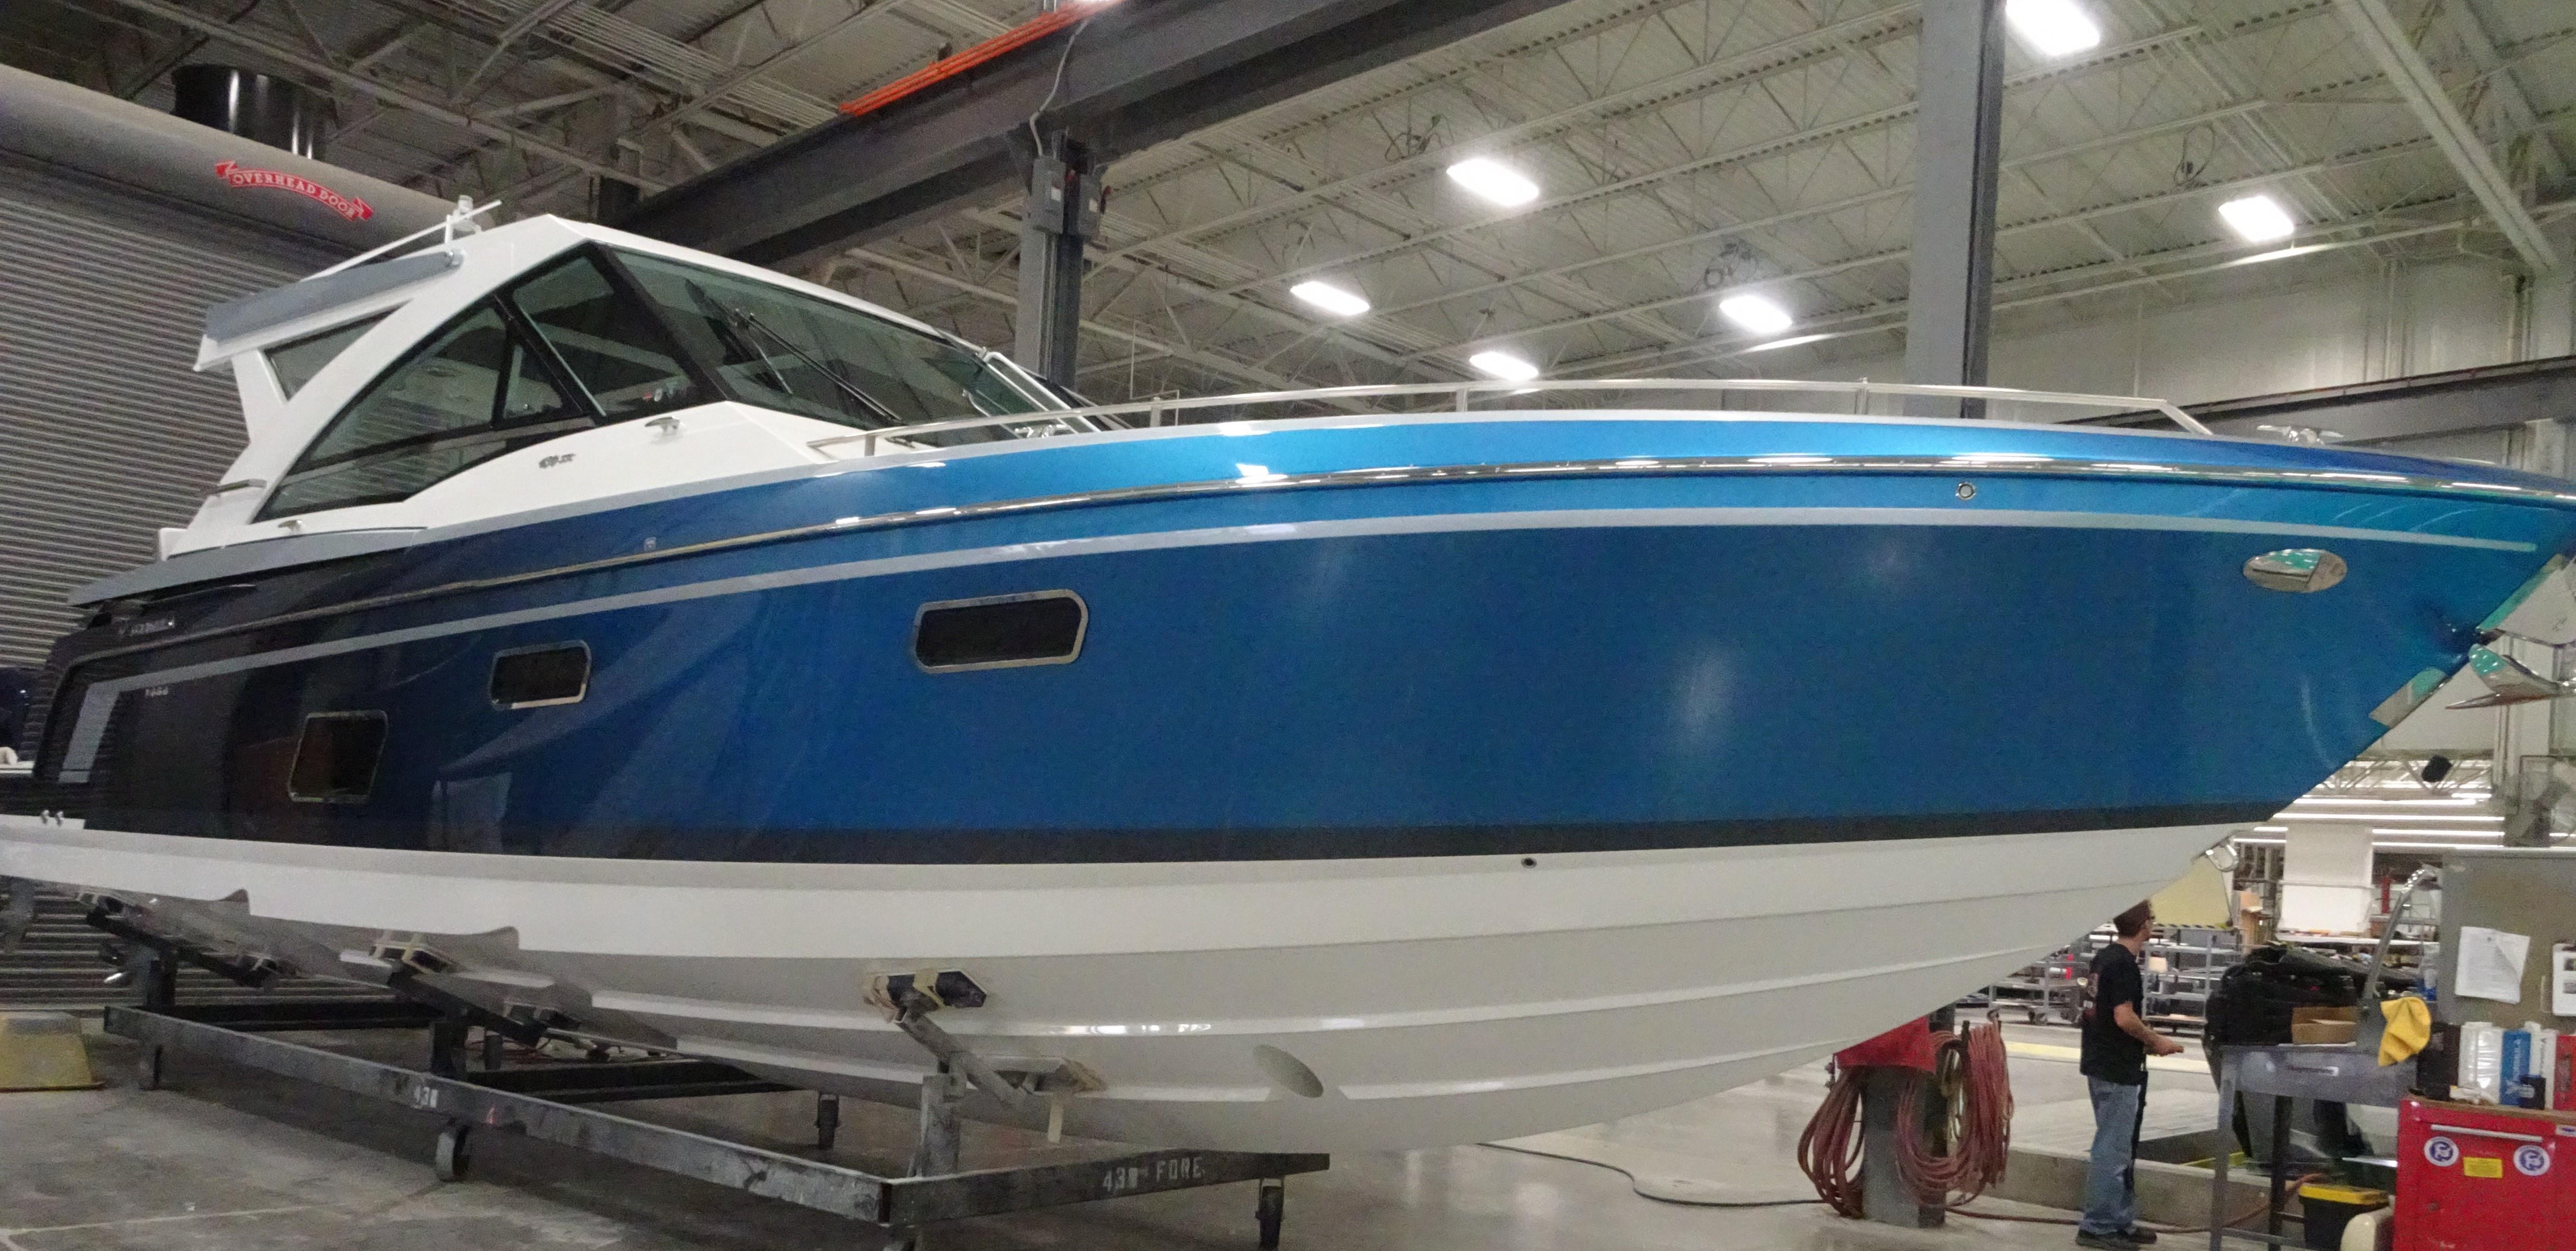 430 All Sport Crossover - Luxury 43 ft Boat